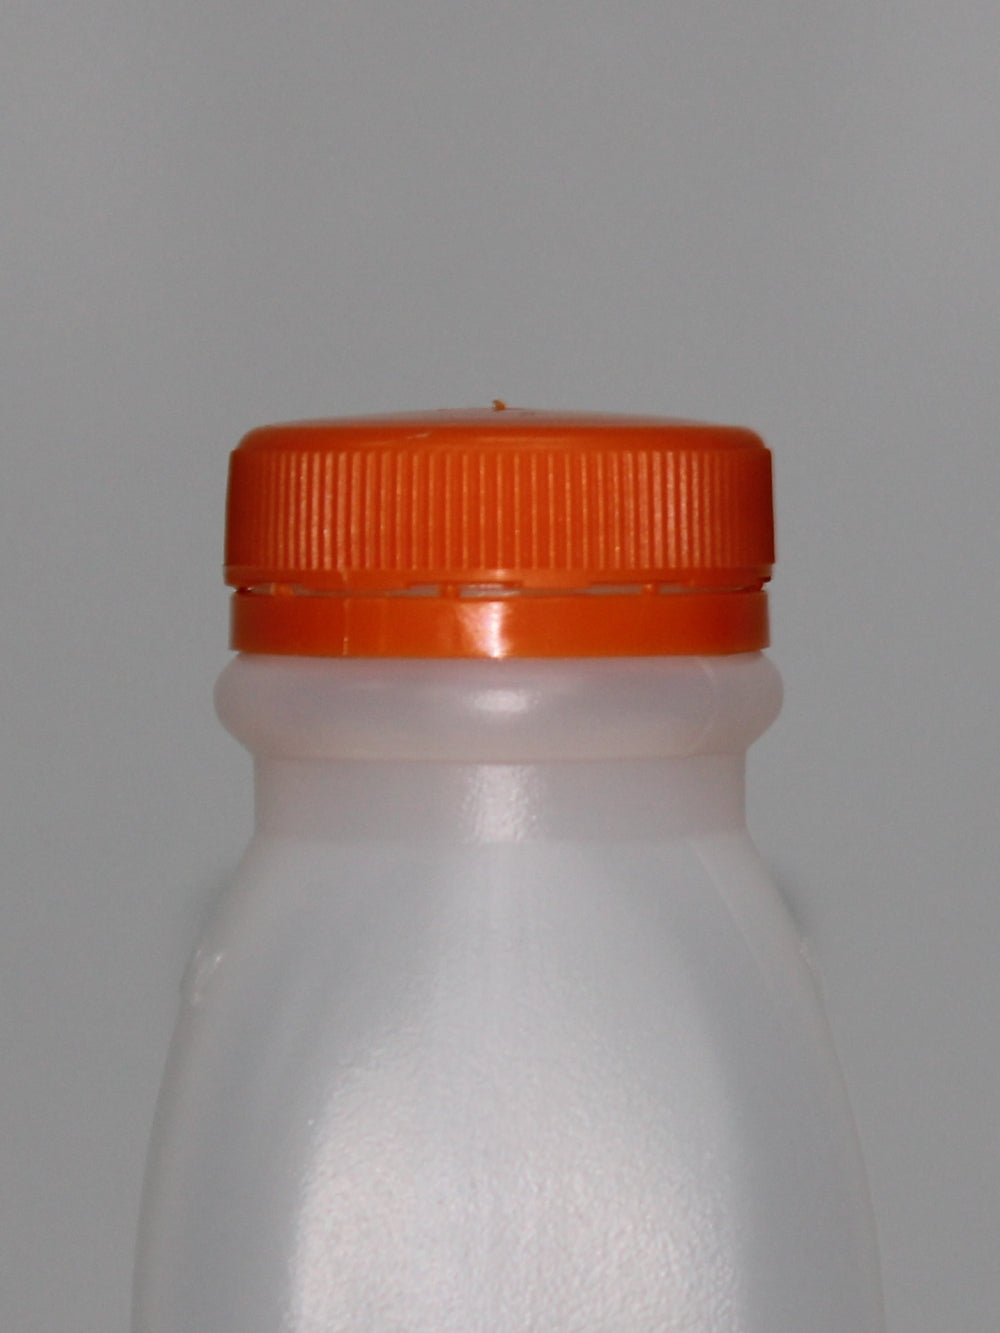 1Lt Dairy/Milk Square HDPE Bottle with Handle - (Box of 100 units) - Packnet SA